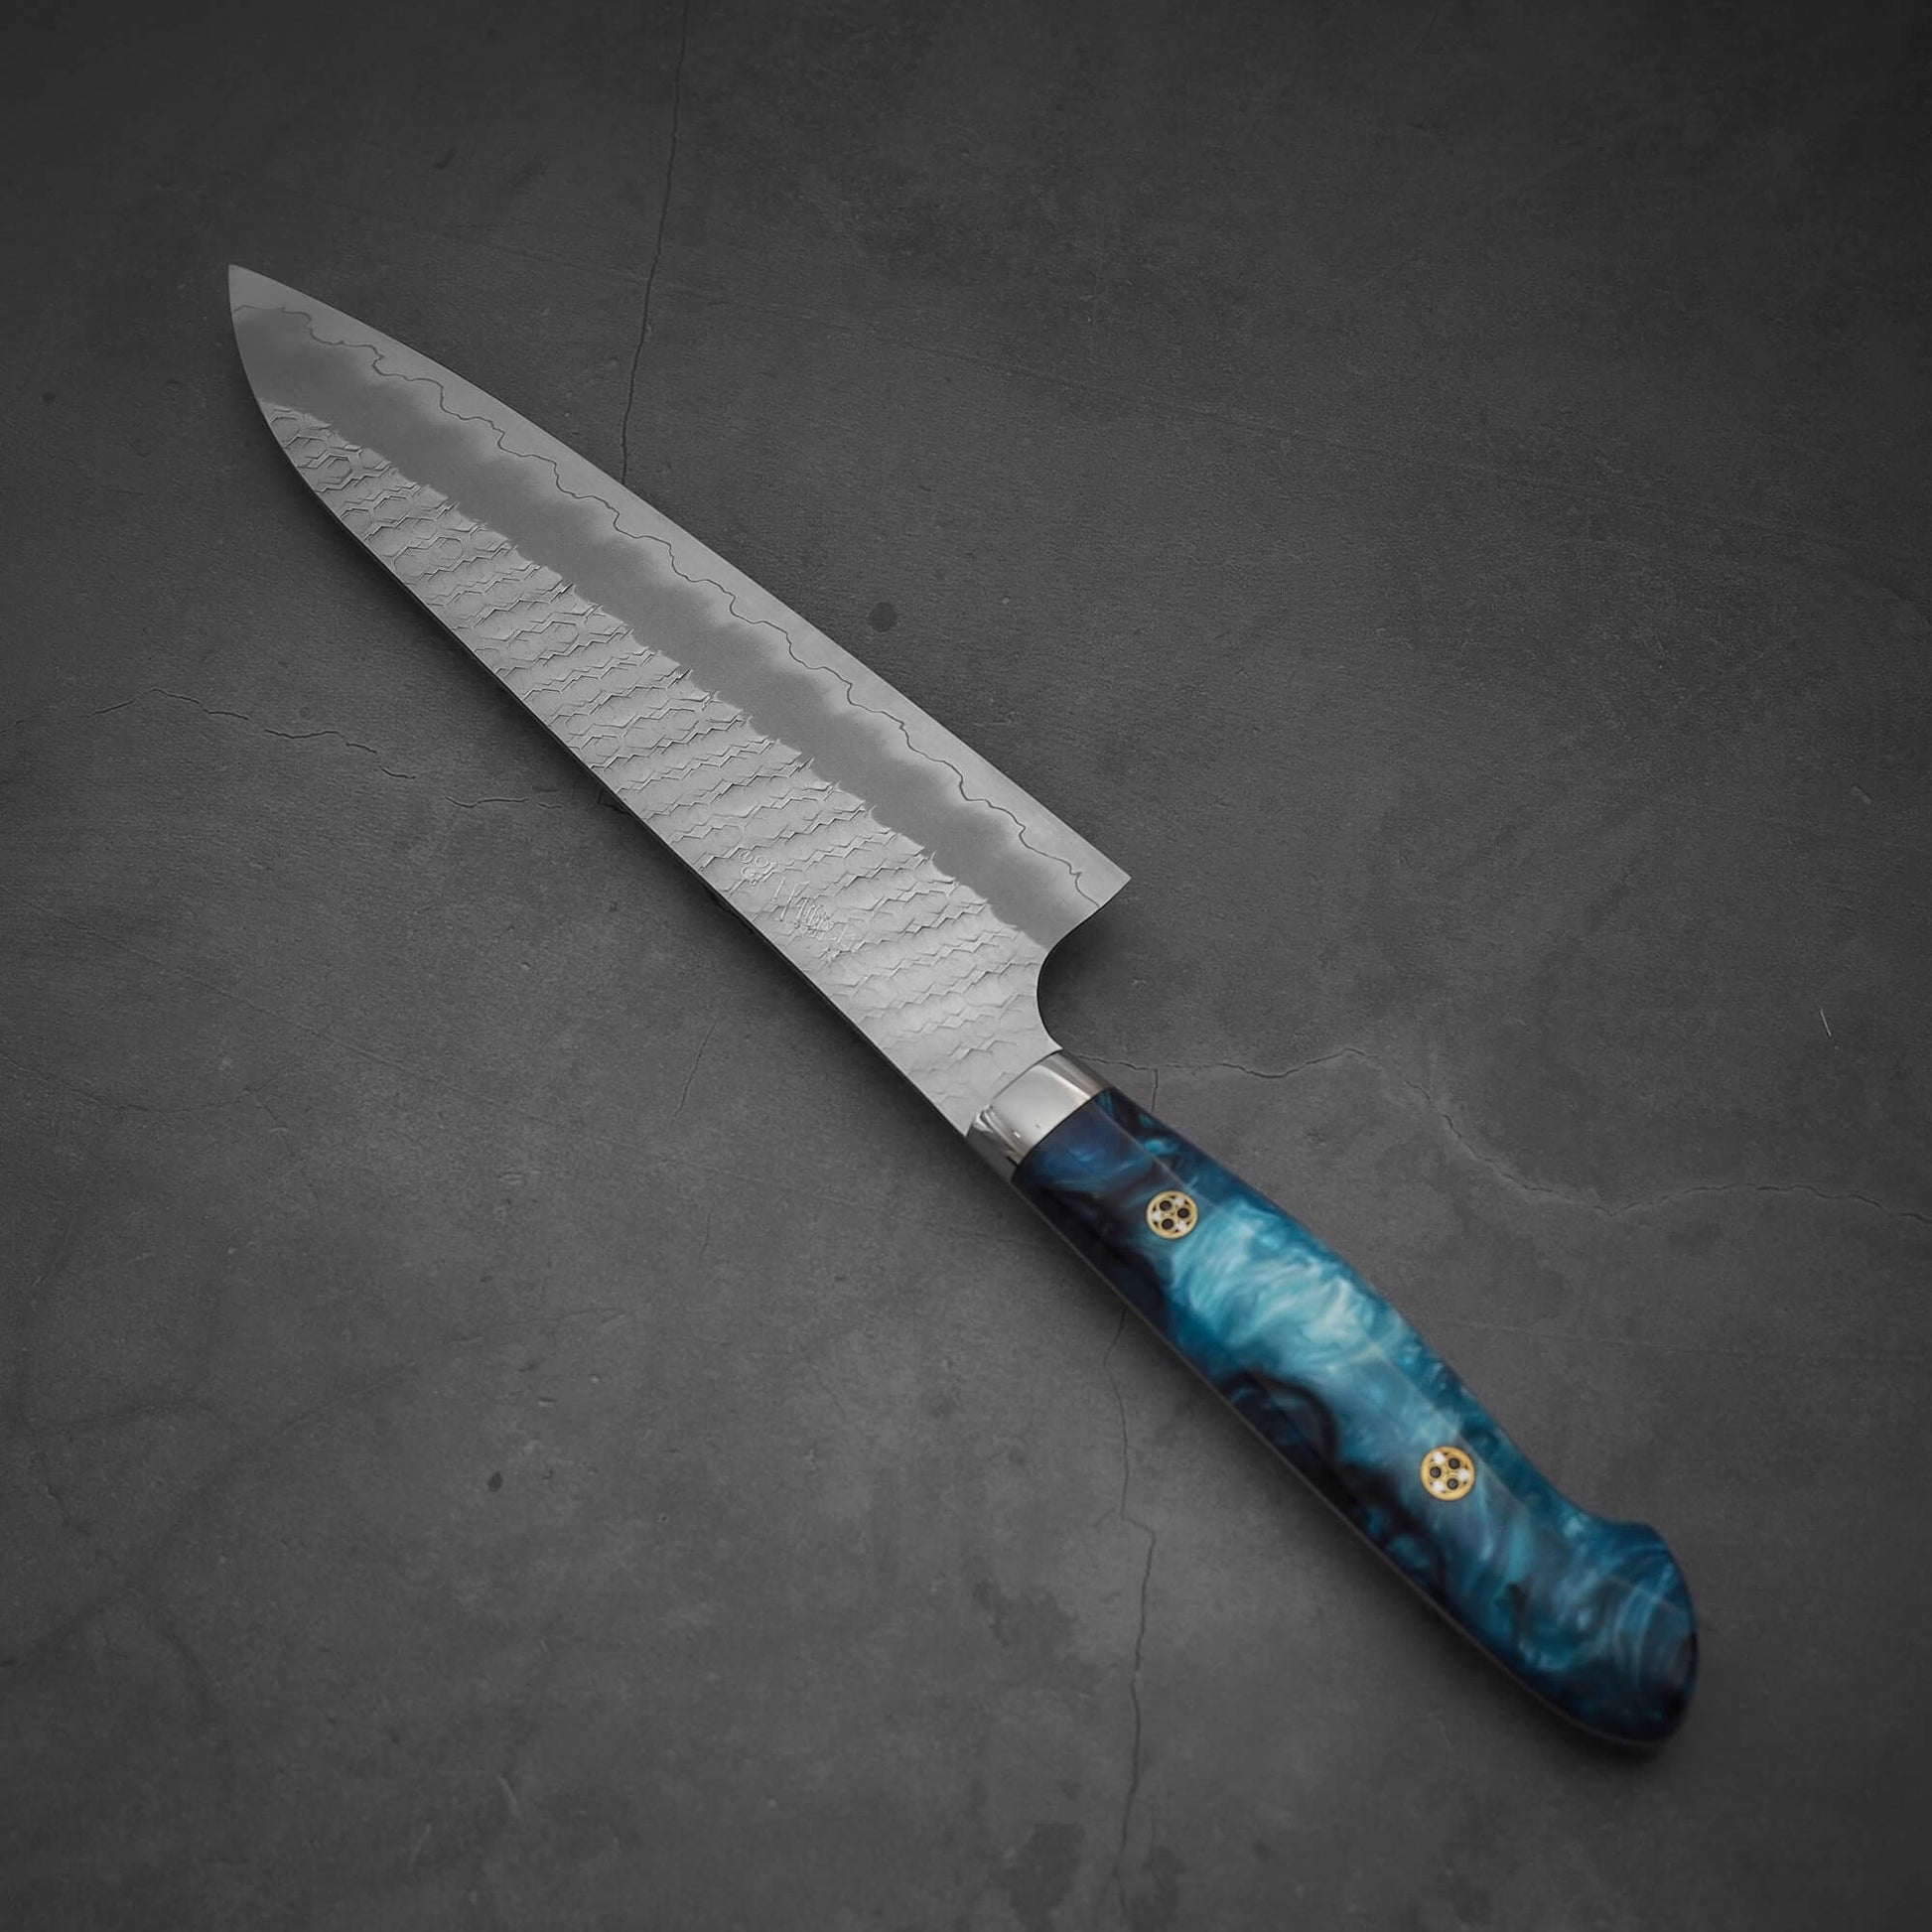 Top view of 210mm Nigara tsuchime SG2 gyuto knife with blue handle in diagonal position handle at the bottom right